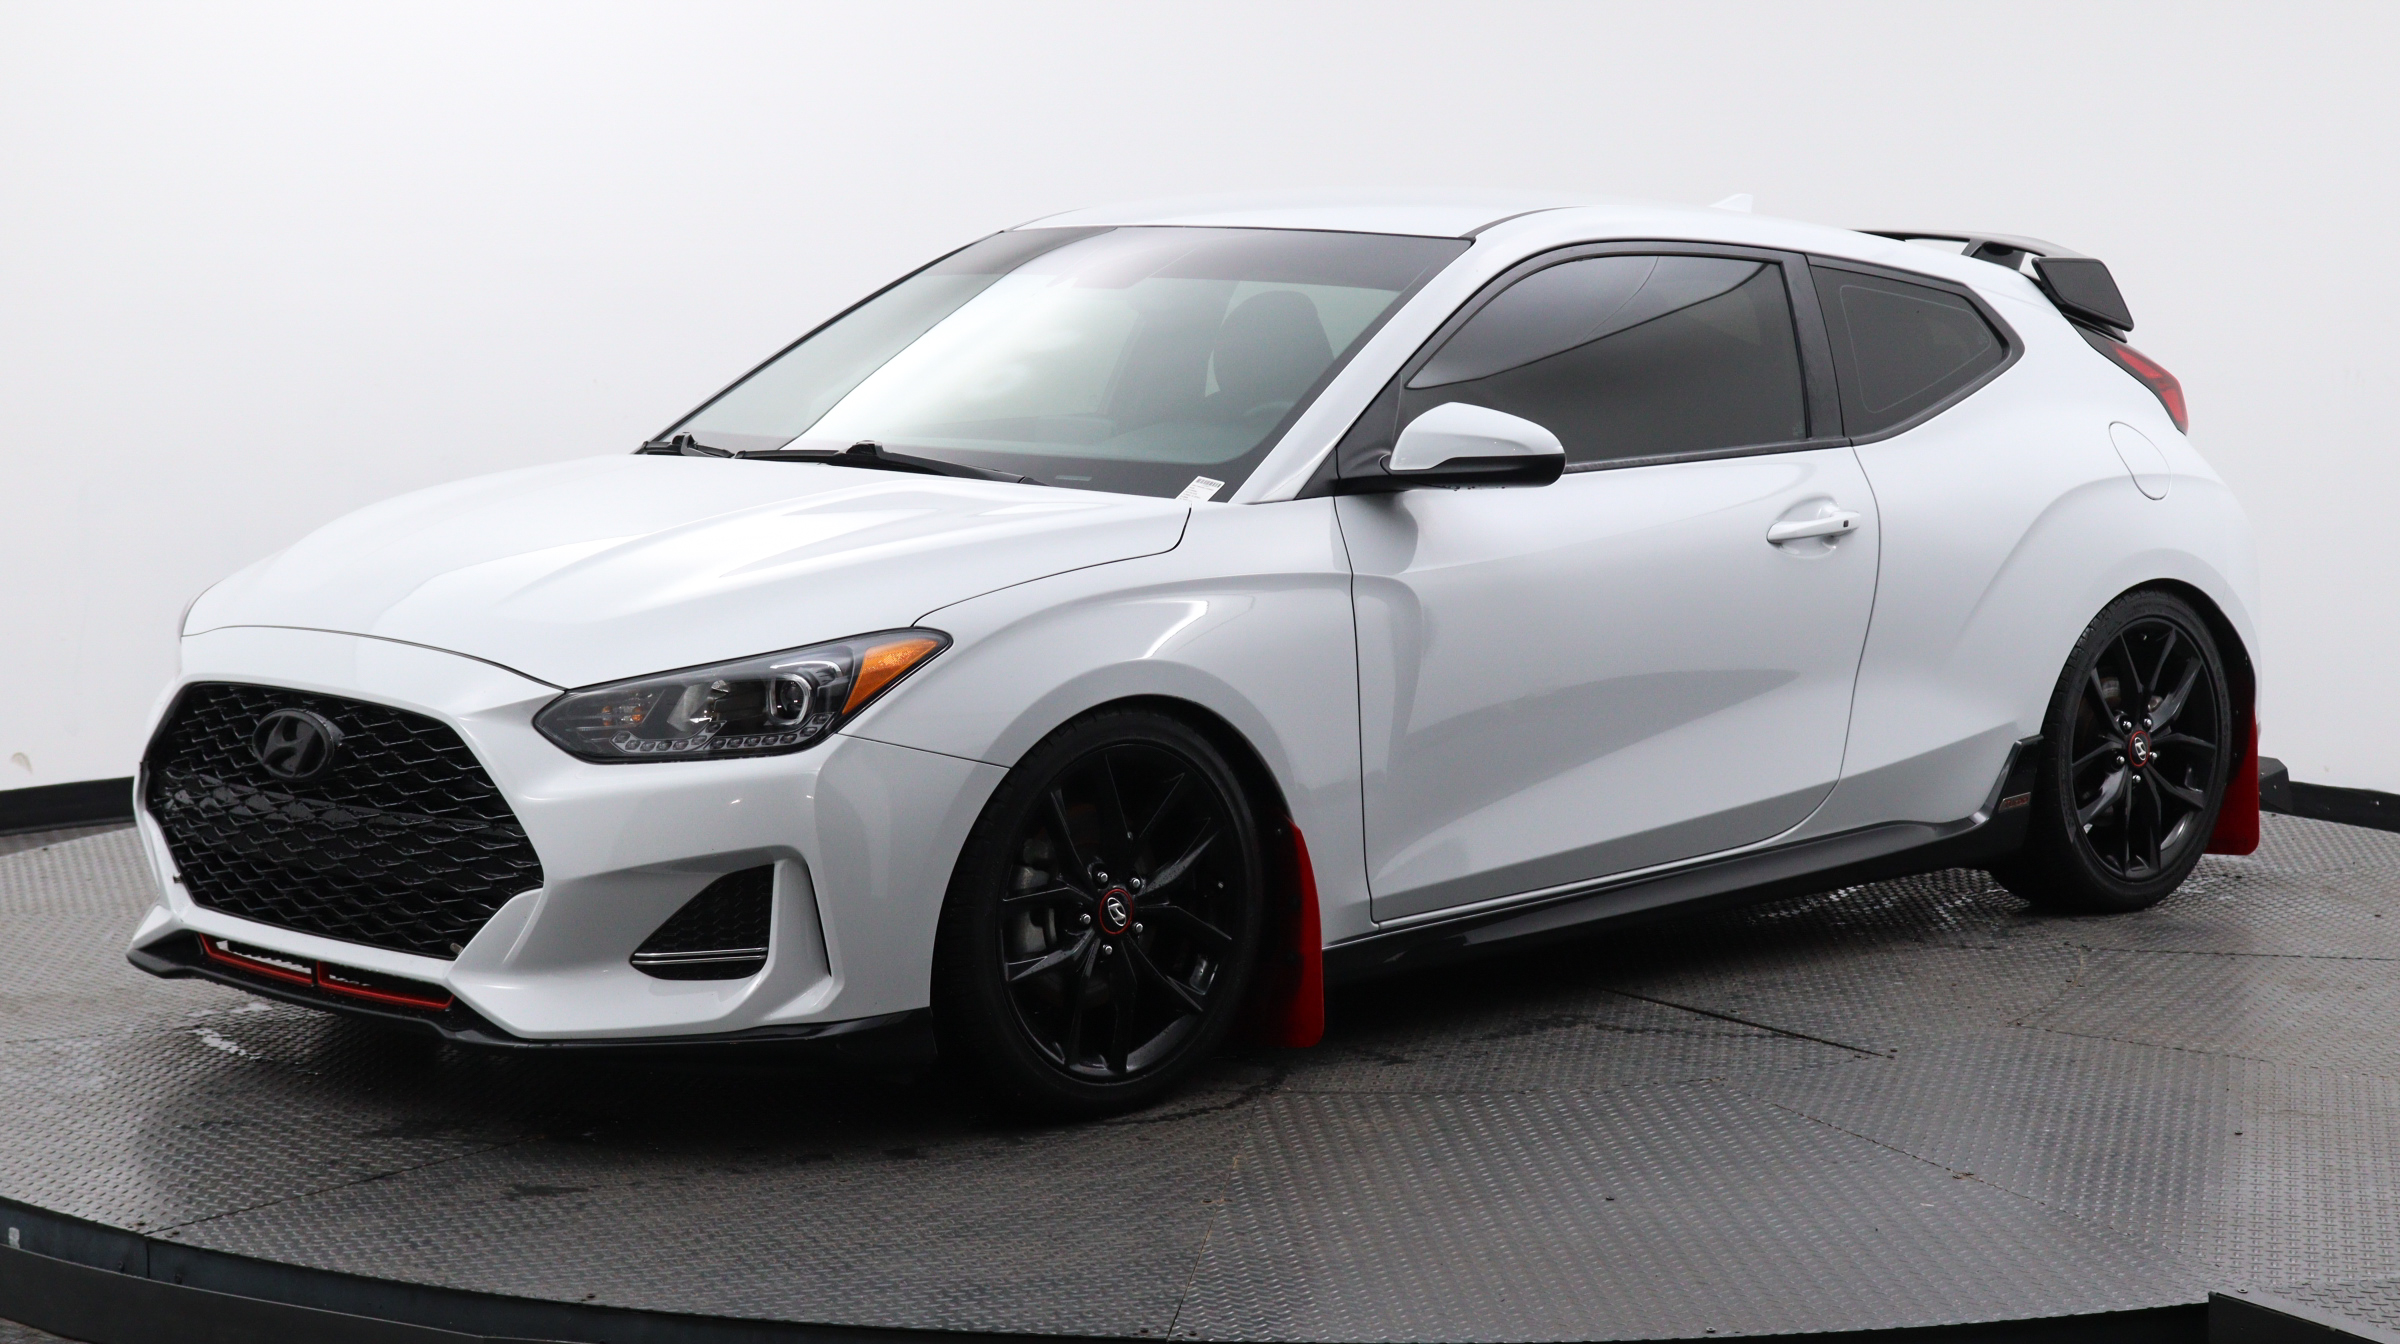 Used 2020 HYUNDAI VELOSTER TURBO R-SPEC for sale in MARGATE | 122994